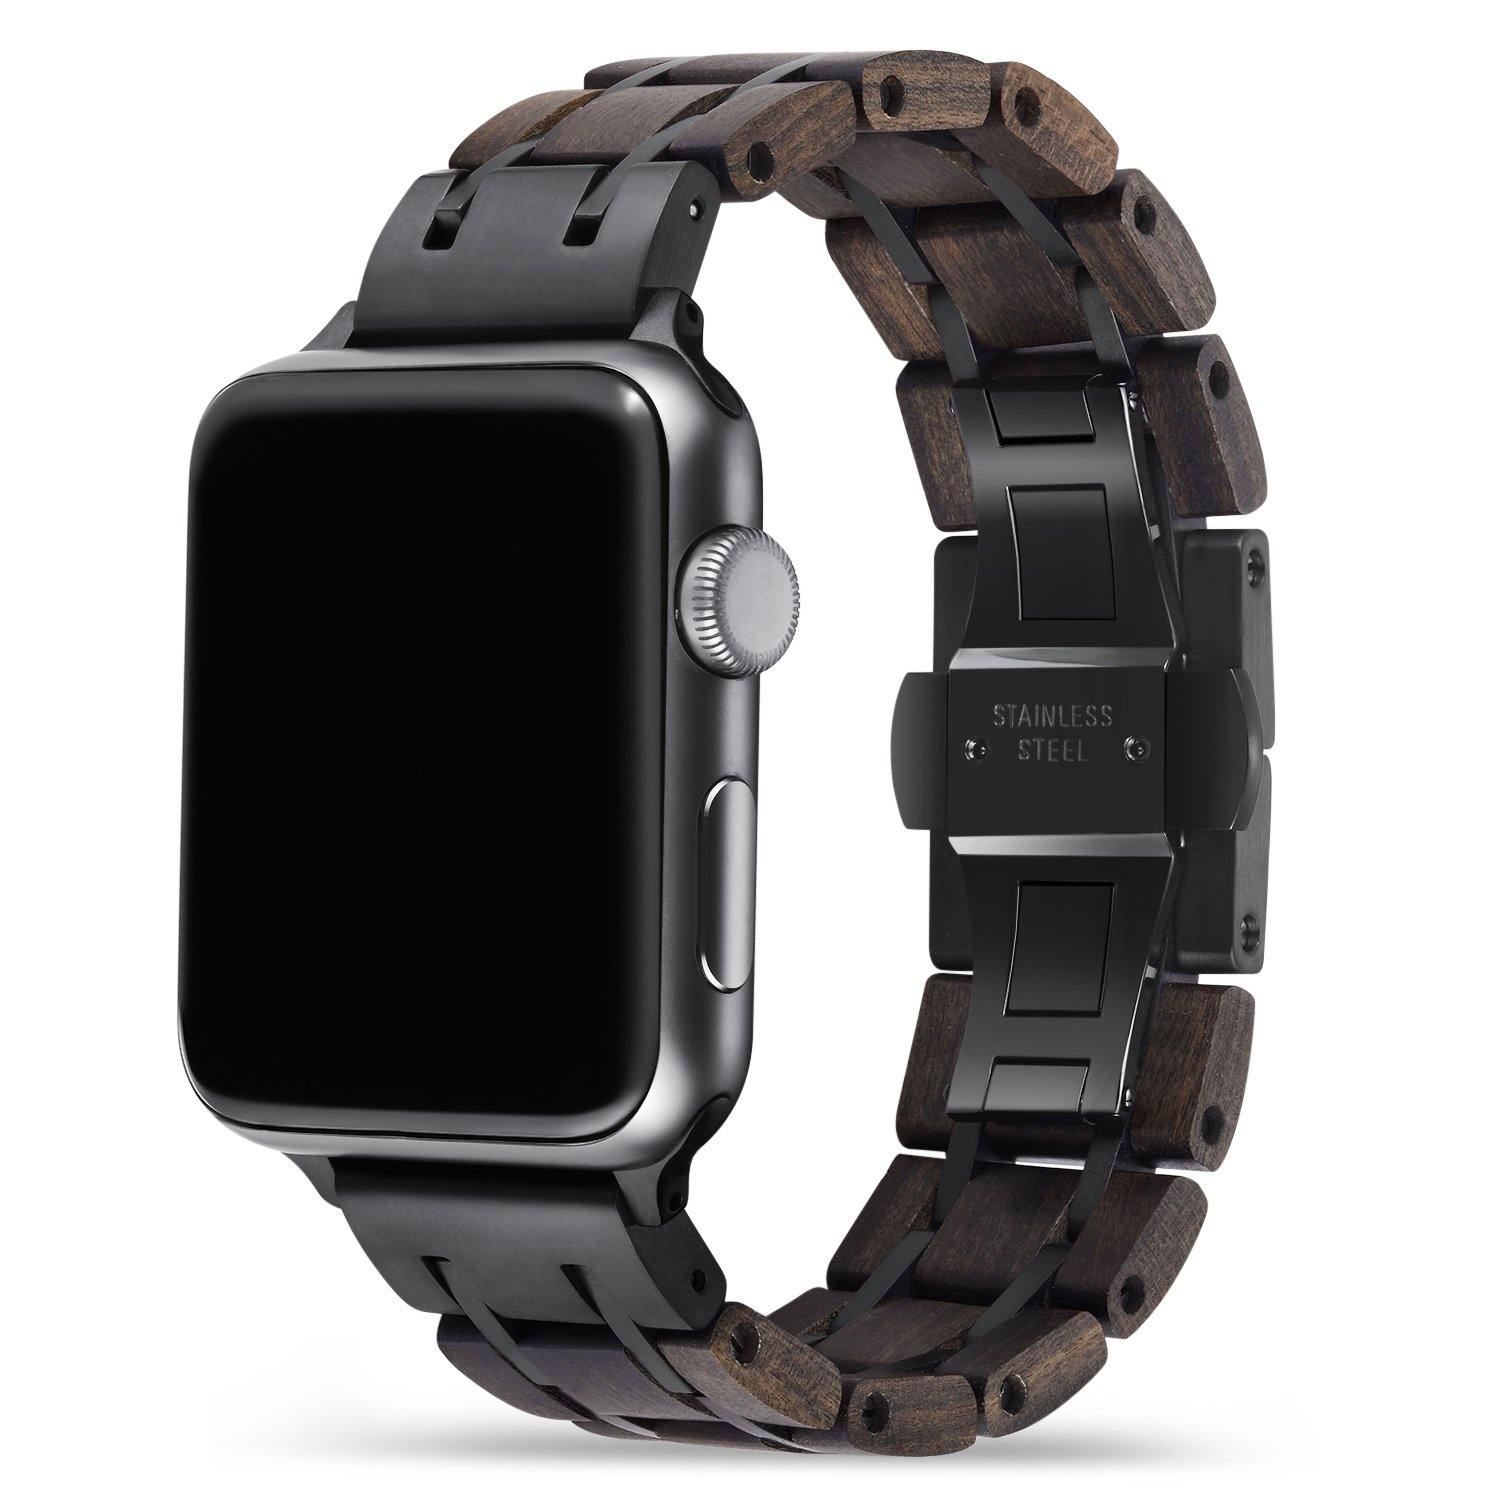 Sandalwood Black Apple Watch Band 🌳 Natural Wood. ♻️ Eco-friendly. ✈️ Free Worldwide Shipping. 🎁 Perfect Gift.